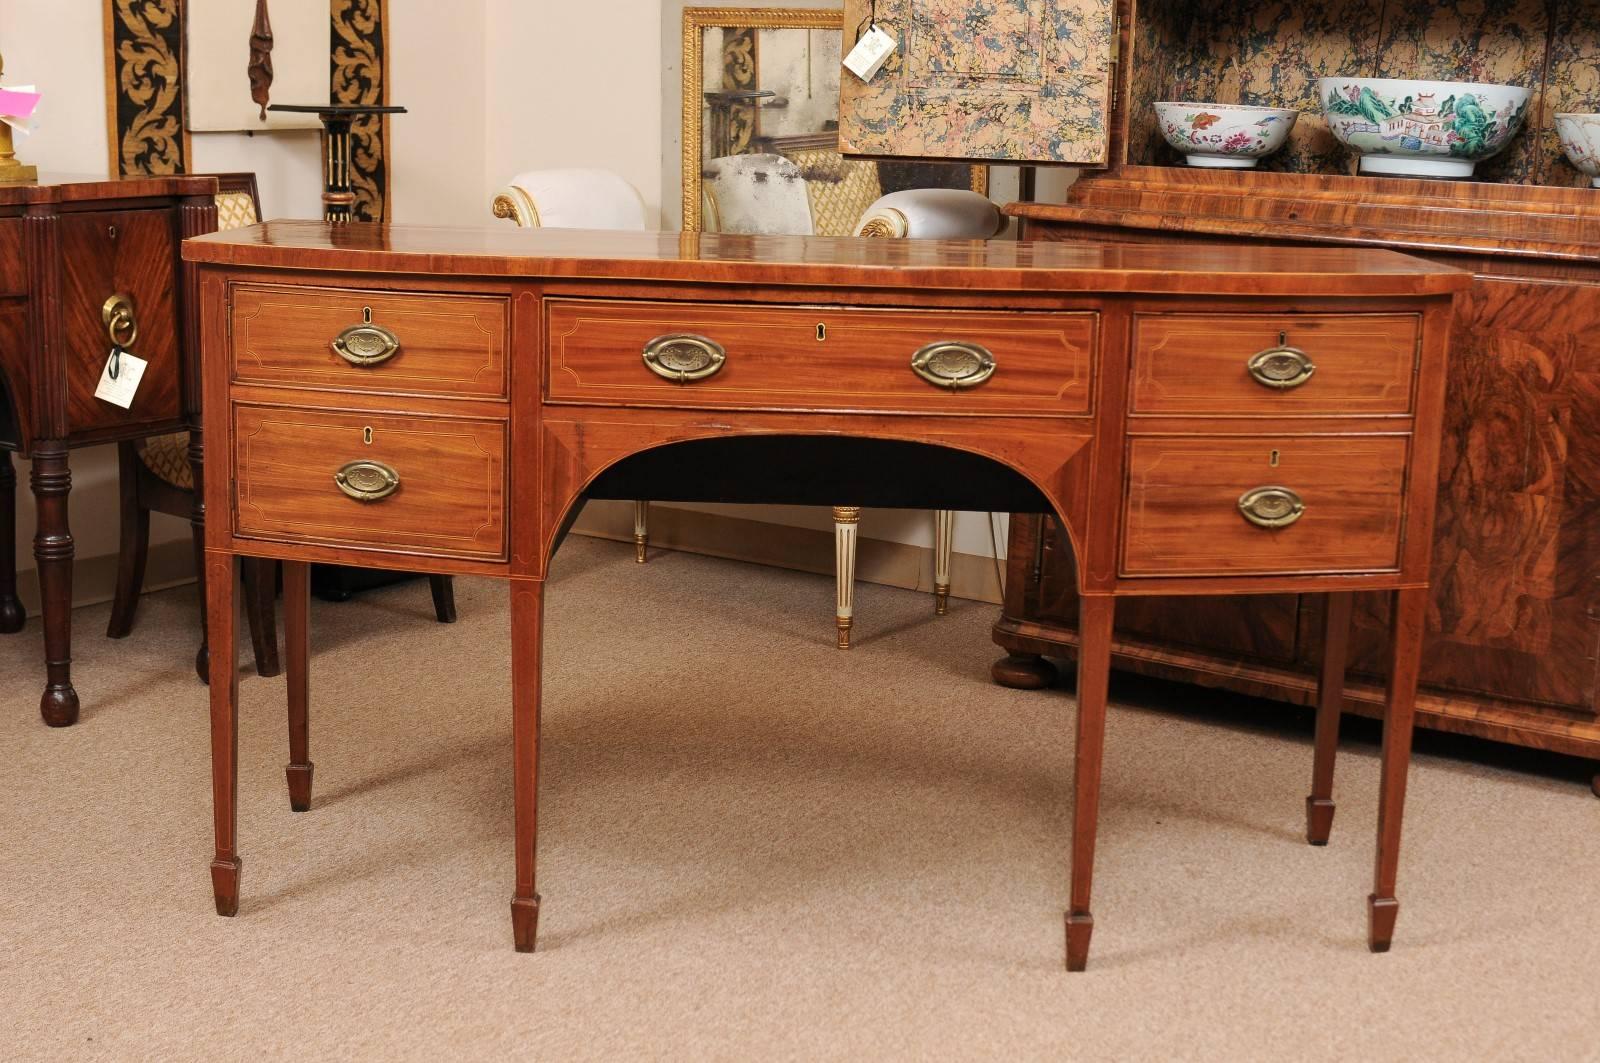 An early 19th century English George III mahogany bow-front sideboard with rosewood crossbanding, boxwood string inlay, 2 cabinets flanking center drawer ending with tapered legs and spade feet.